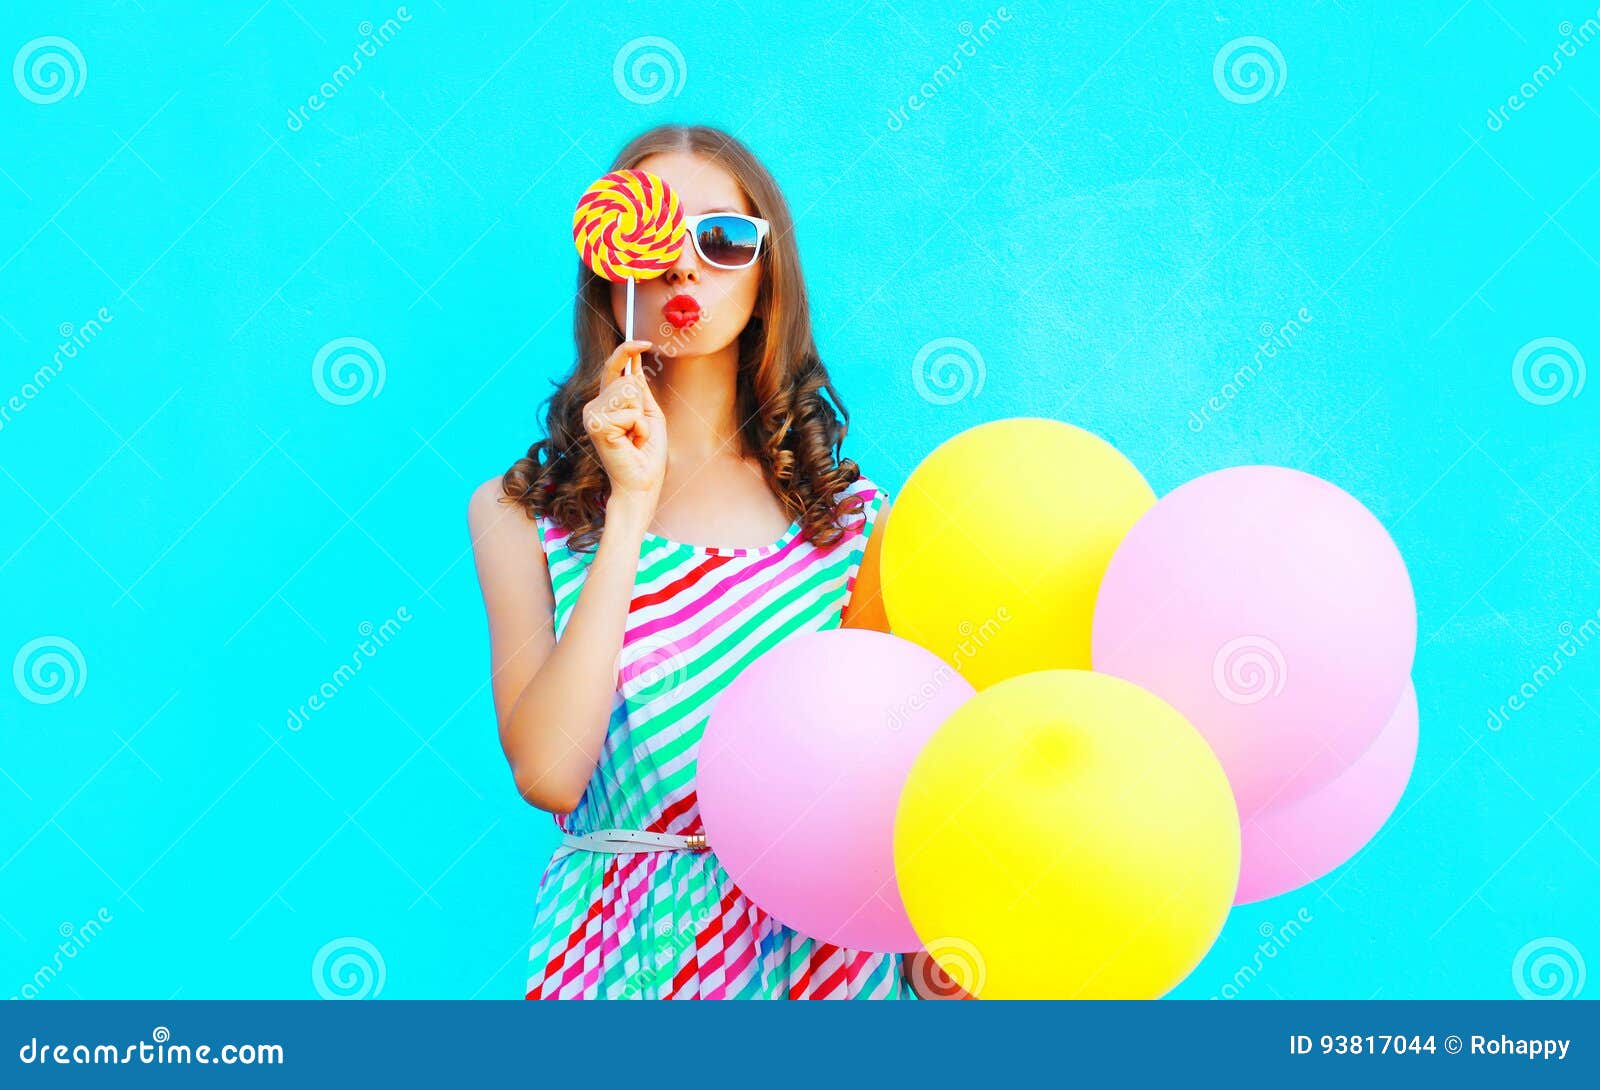 Fashion Portrait Pretty Young Woman with an Air Balloons, Lollipop ...